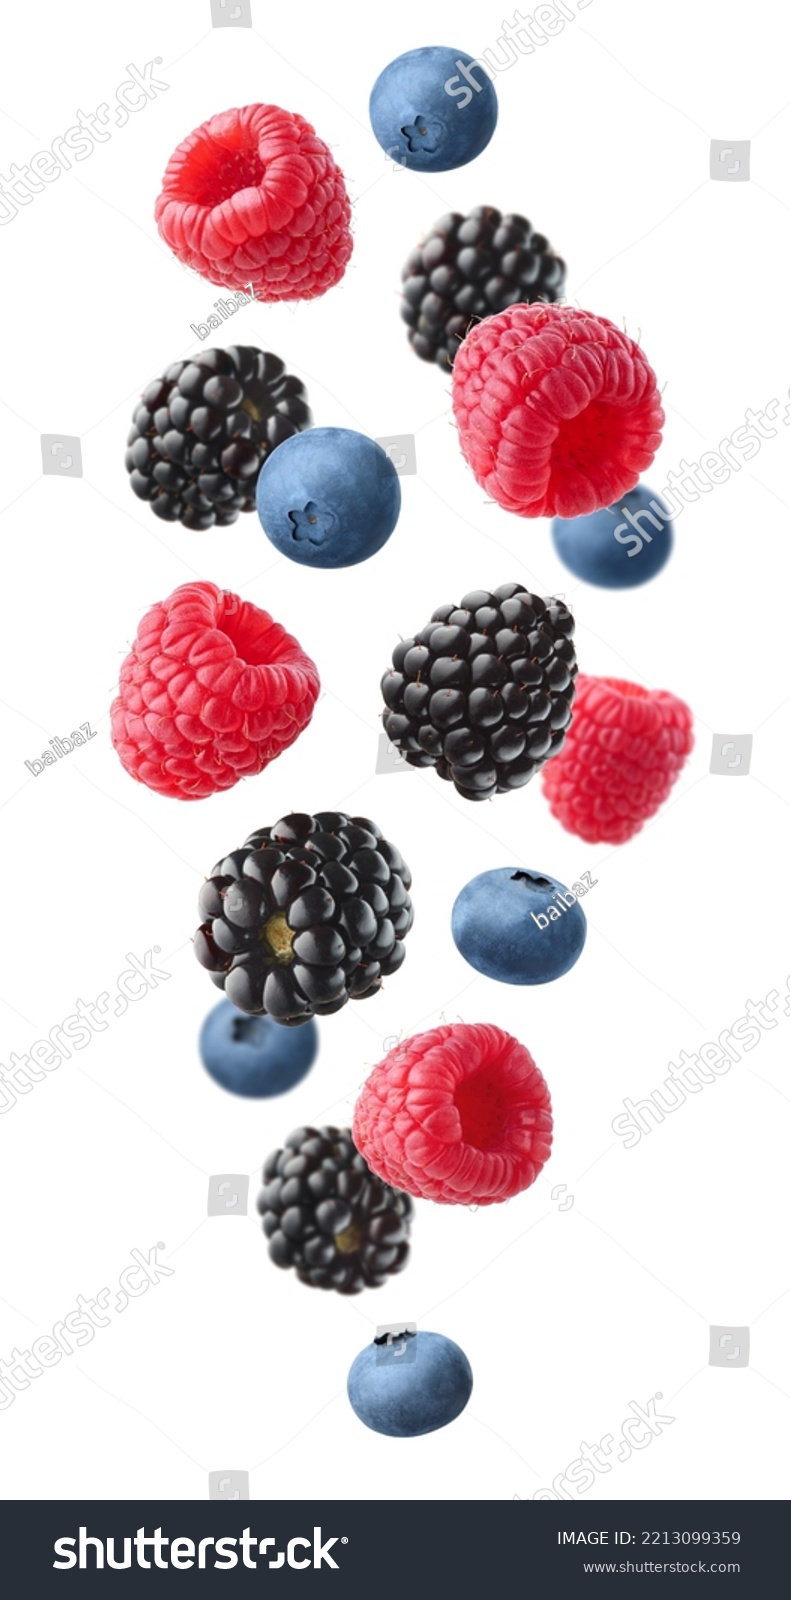 Collection of various falling fresh ripe wild berries isolated on white background. Raspberry, blackberry and blueberry. Vertical composition #2213099359